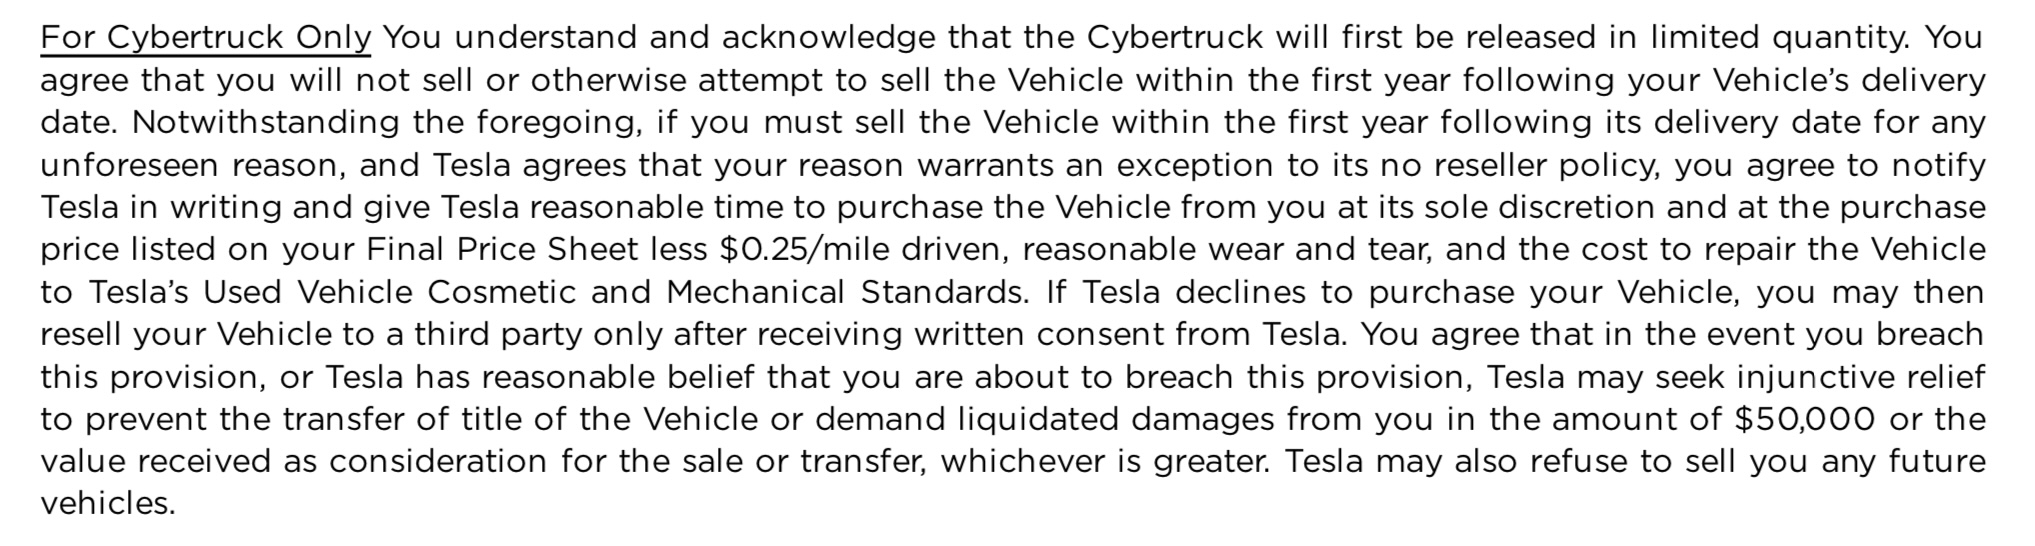 Tesla Cybertruck Question about Tesla buying the Cybertruck back within a year for purchased price less mileage and recondition cost IMG_0659